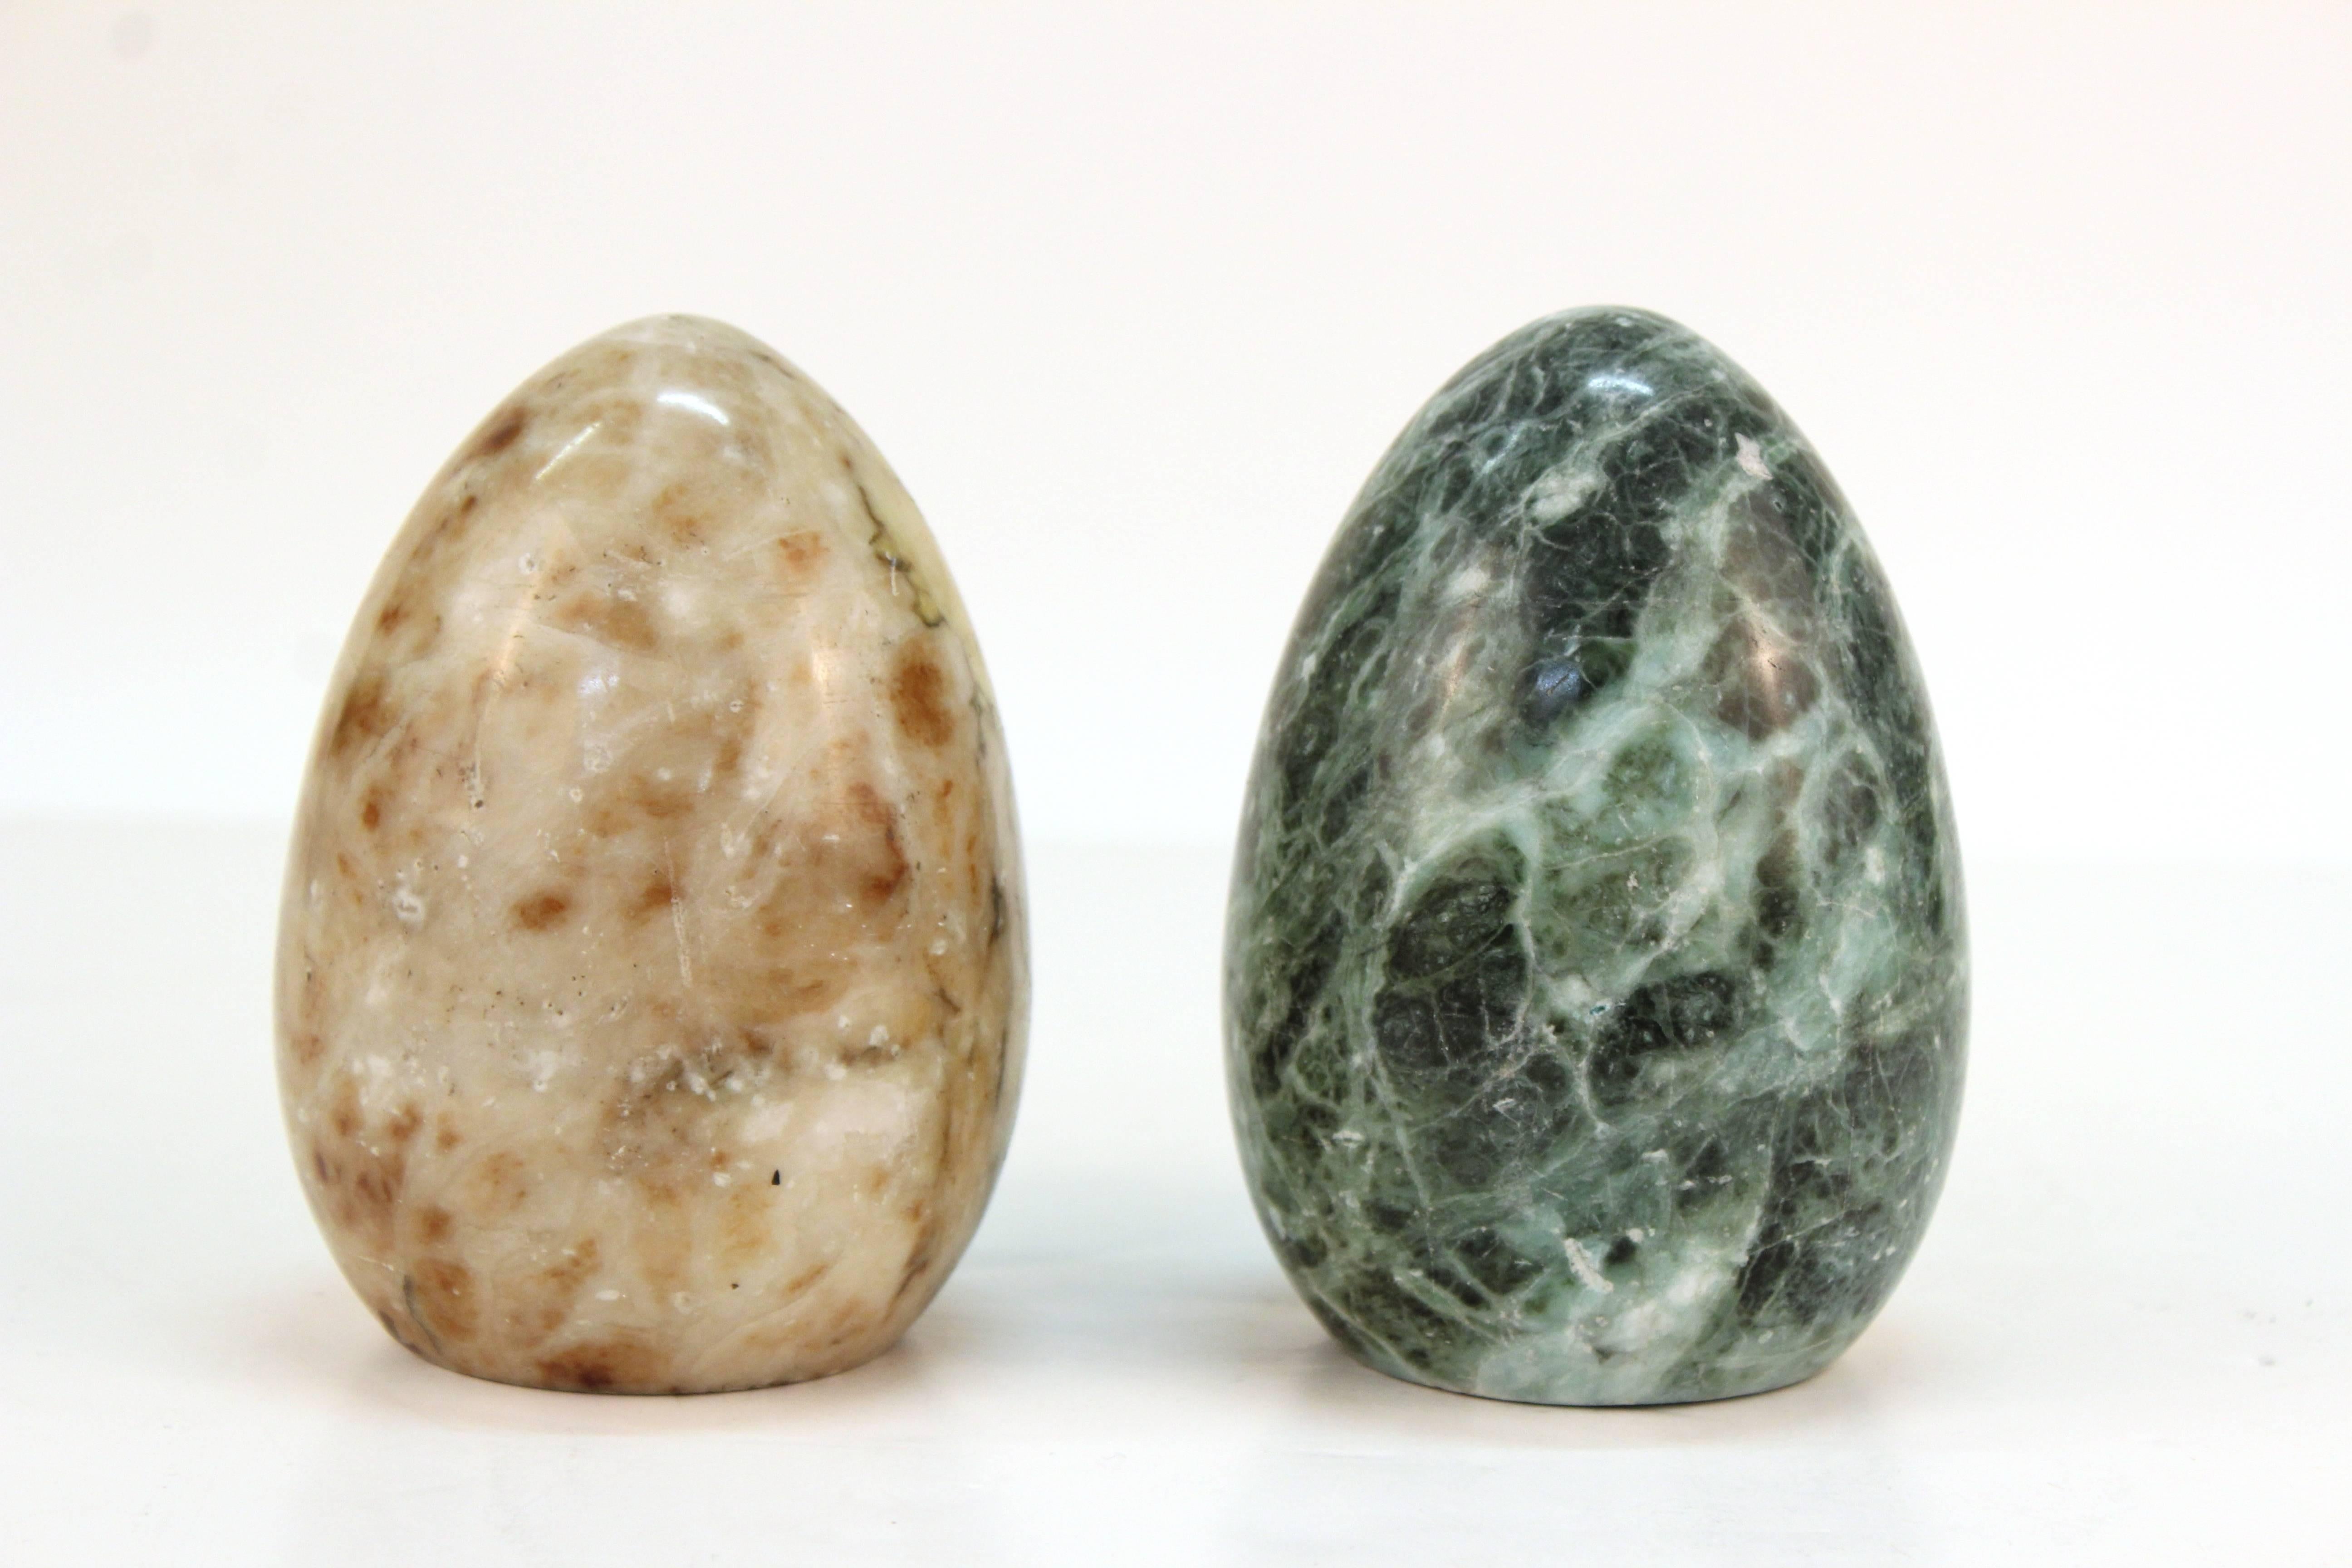 A pair of egg paperweights in marbled stone. One in cream with rust accents and another in mossy green; both are highly polished. Despite some wear due to material and use both items are in good condition.